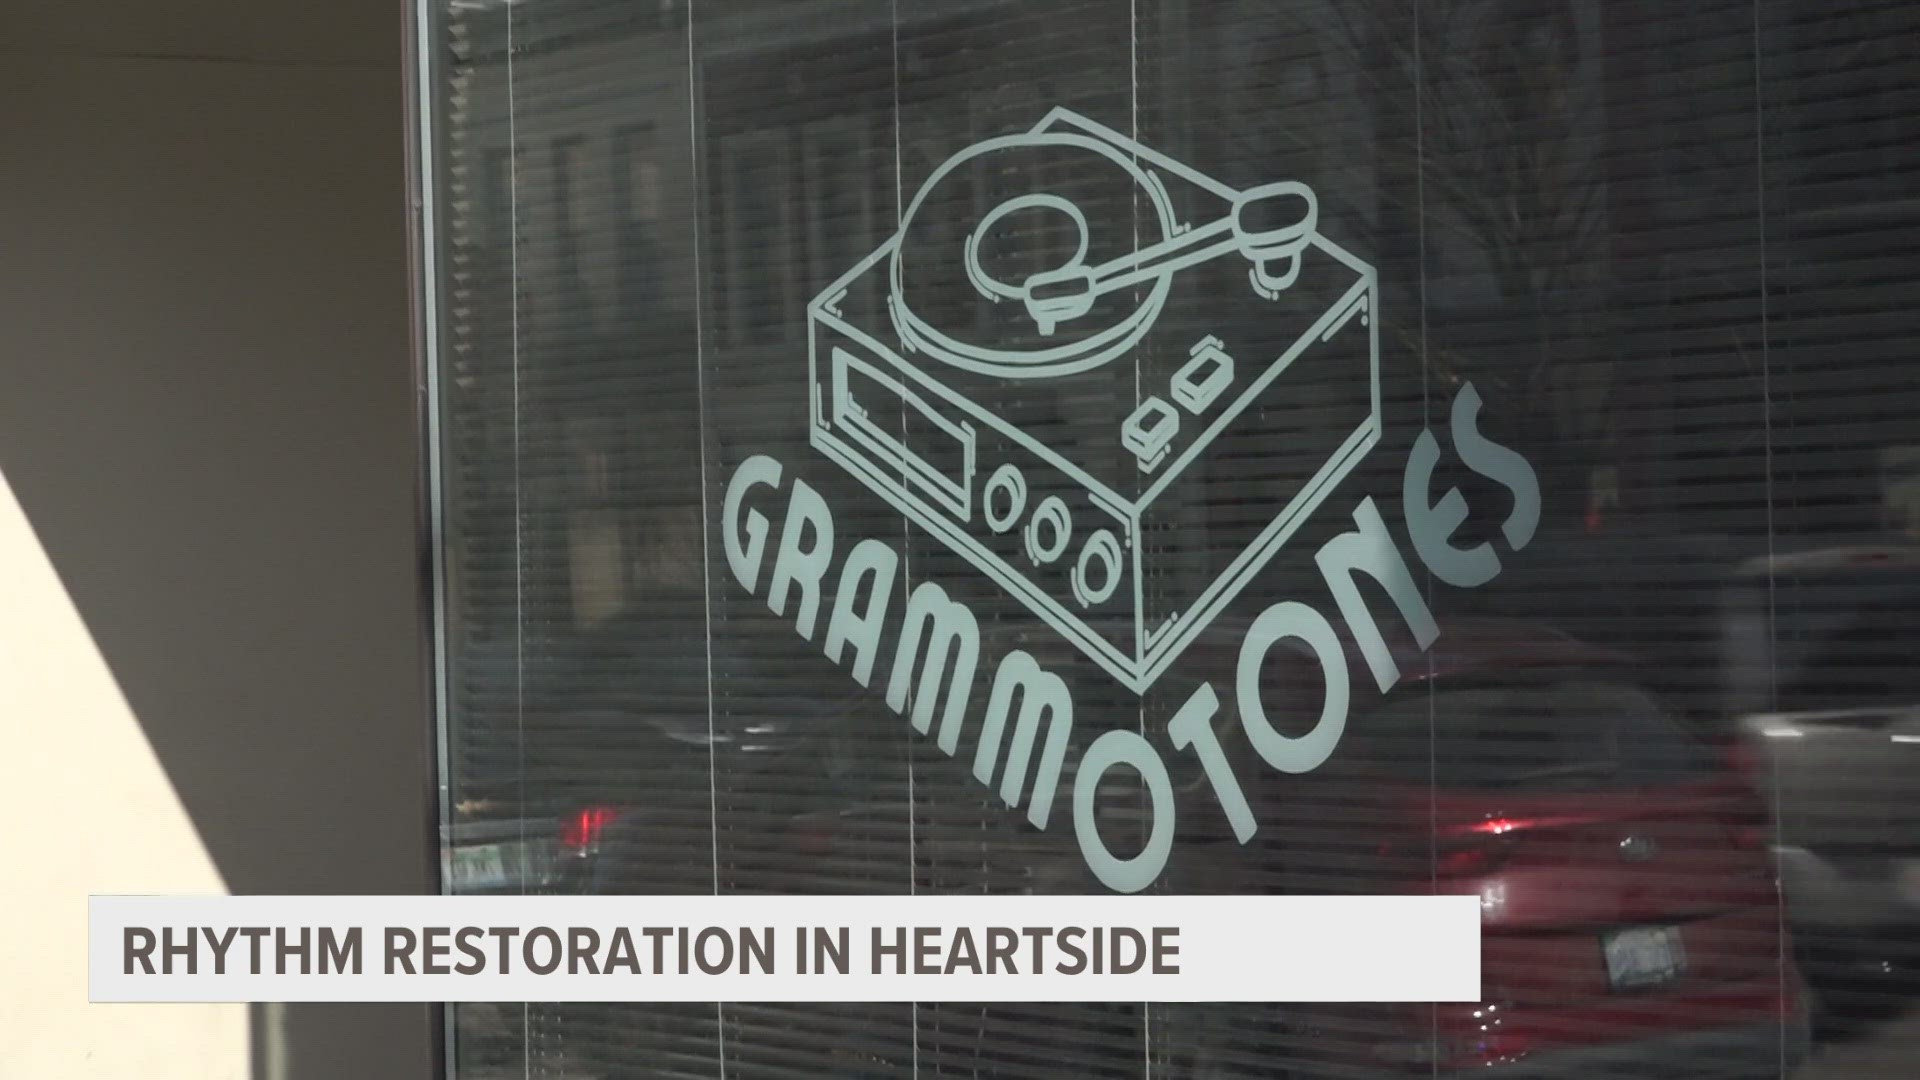 Downtown Grand Rapids has a brand new storefront thats bringing both merchandise and music to the Heartside neighborhood.